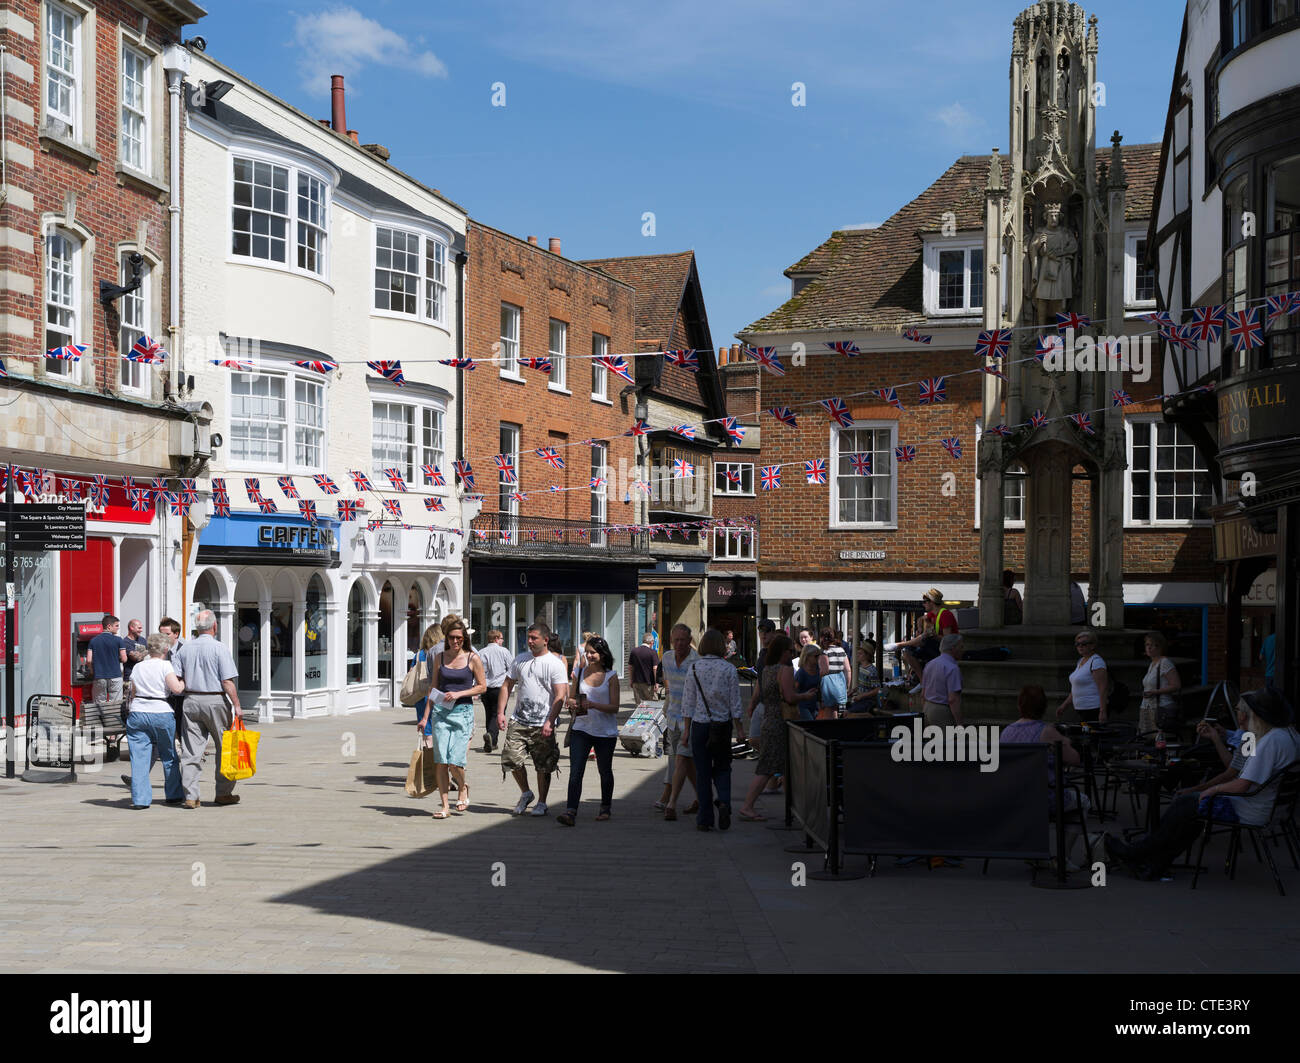 dh High street WINCHESTER HAMPSHIRE Butter Cross or The High Cross Buttercross 15th Century City Cross monument people uk Stock Photo